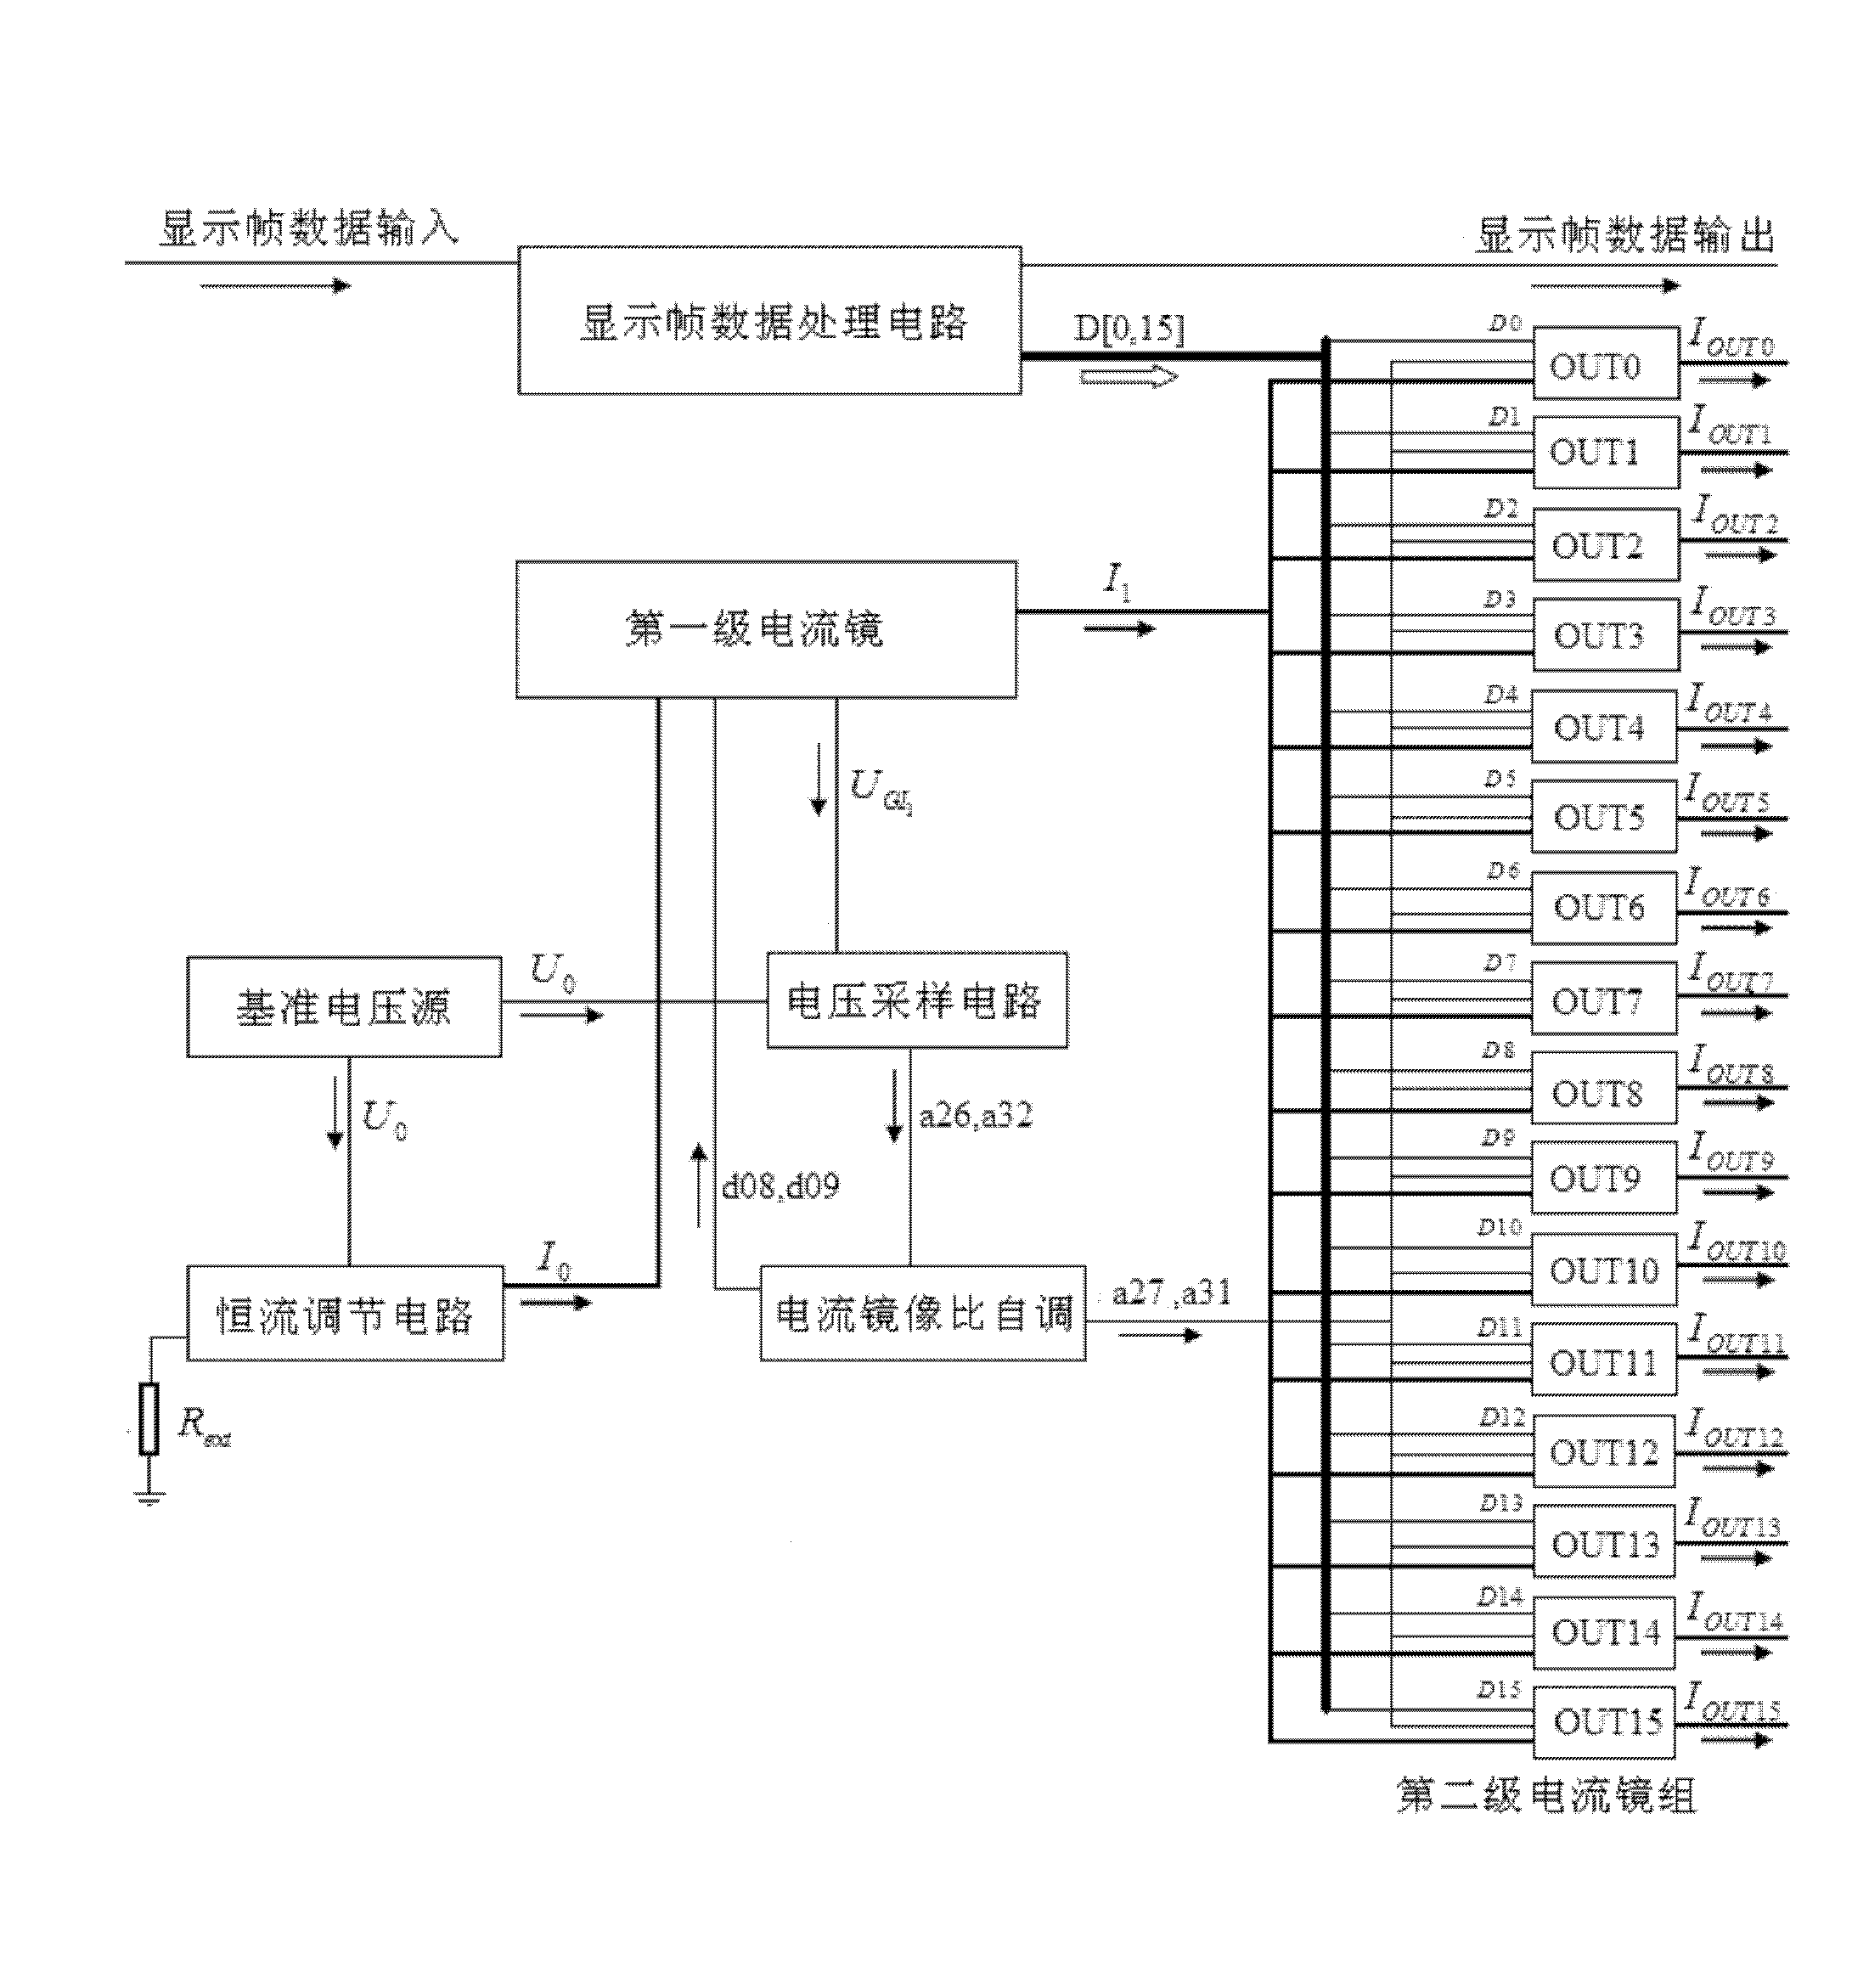 LED (light-emitting diode) display screen constant-current driving circuit with optional mirror image ratio